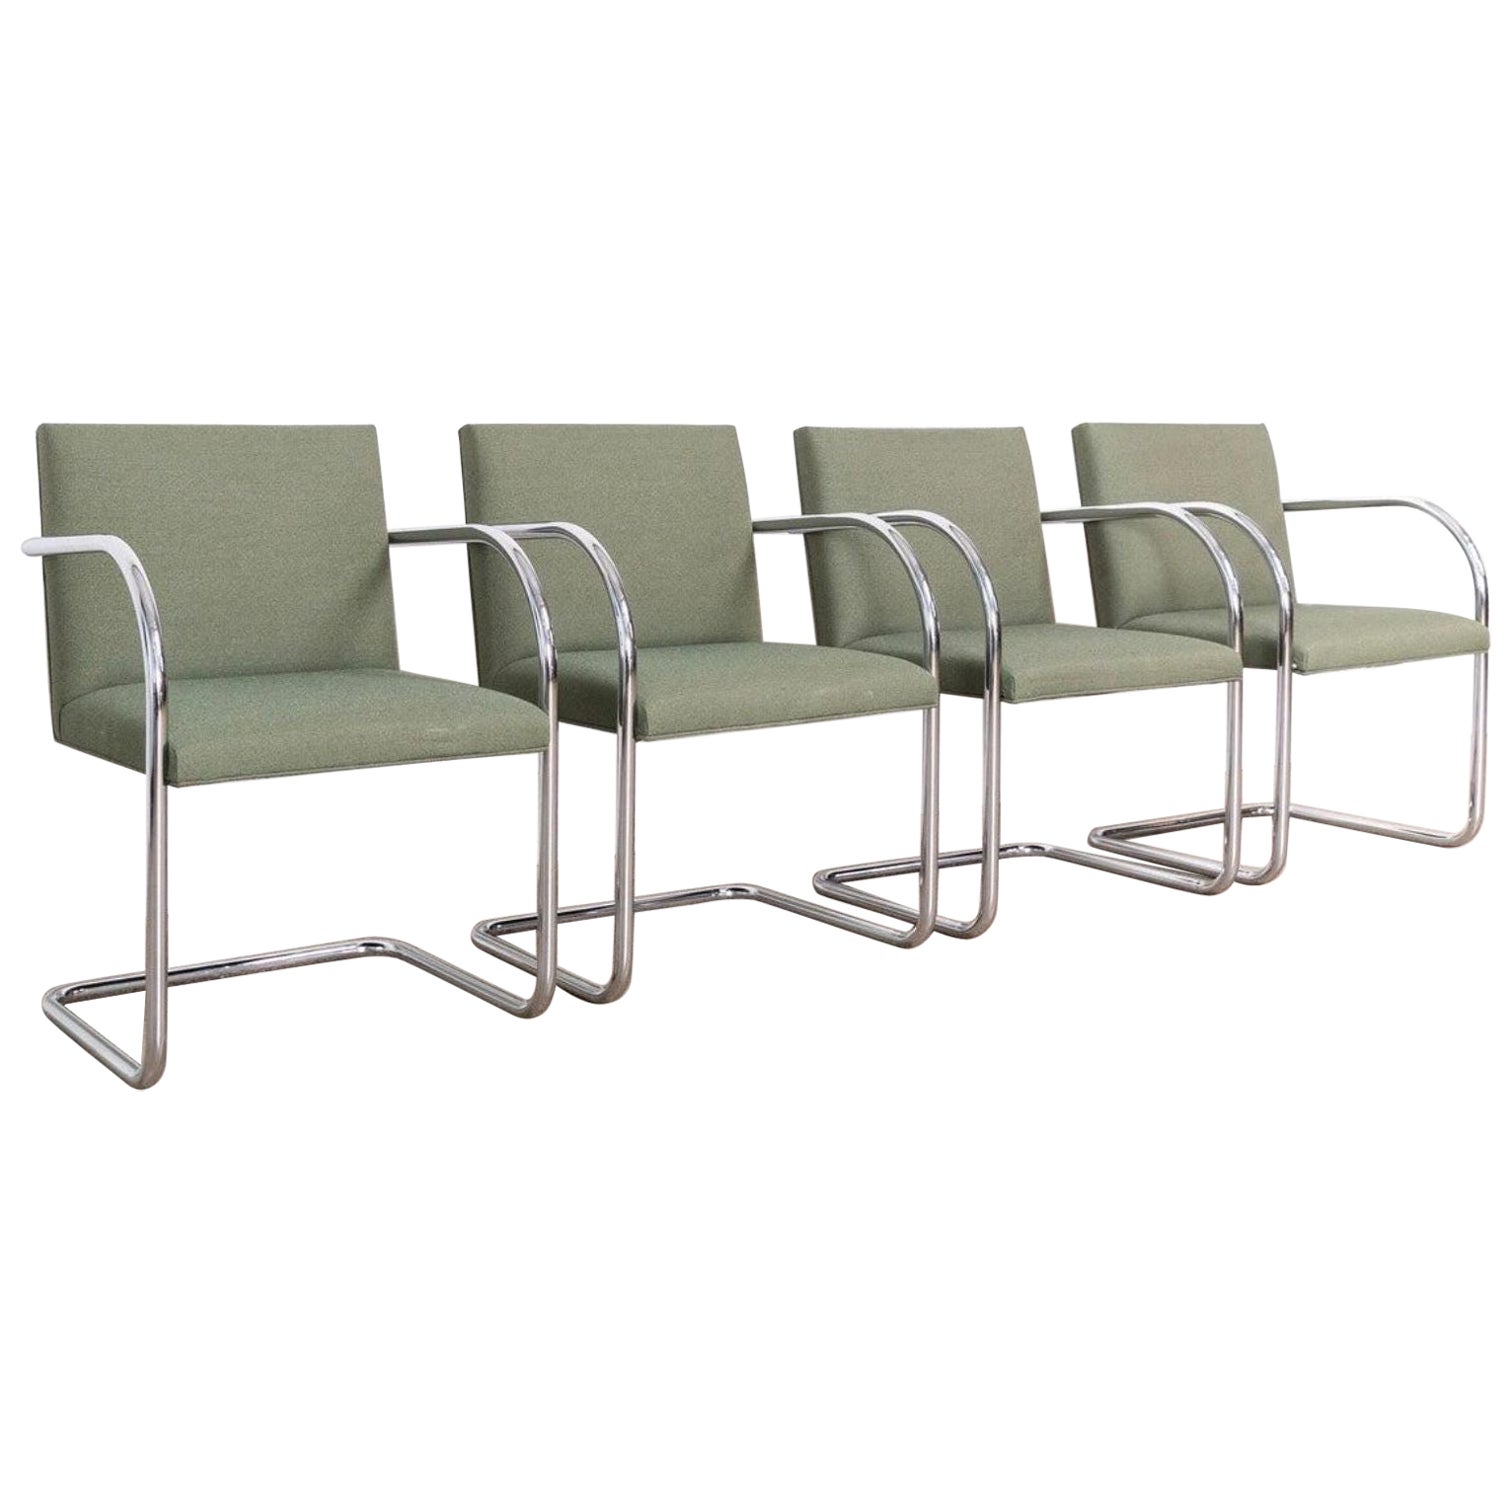 Bauhaus Green Brno Tubular Cantilever Dining Chairs by Mies Van Der Rohe